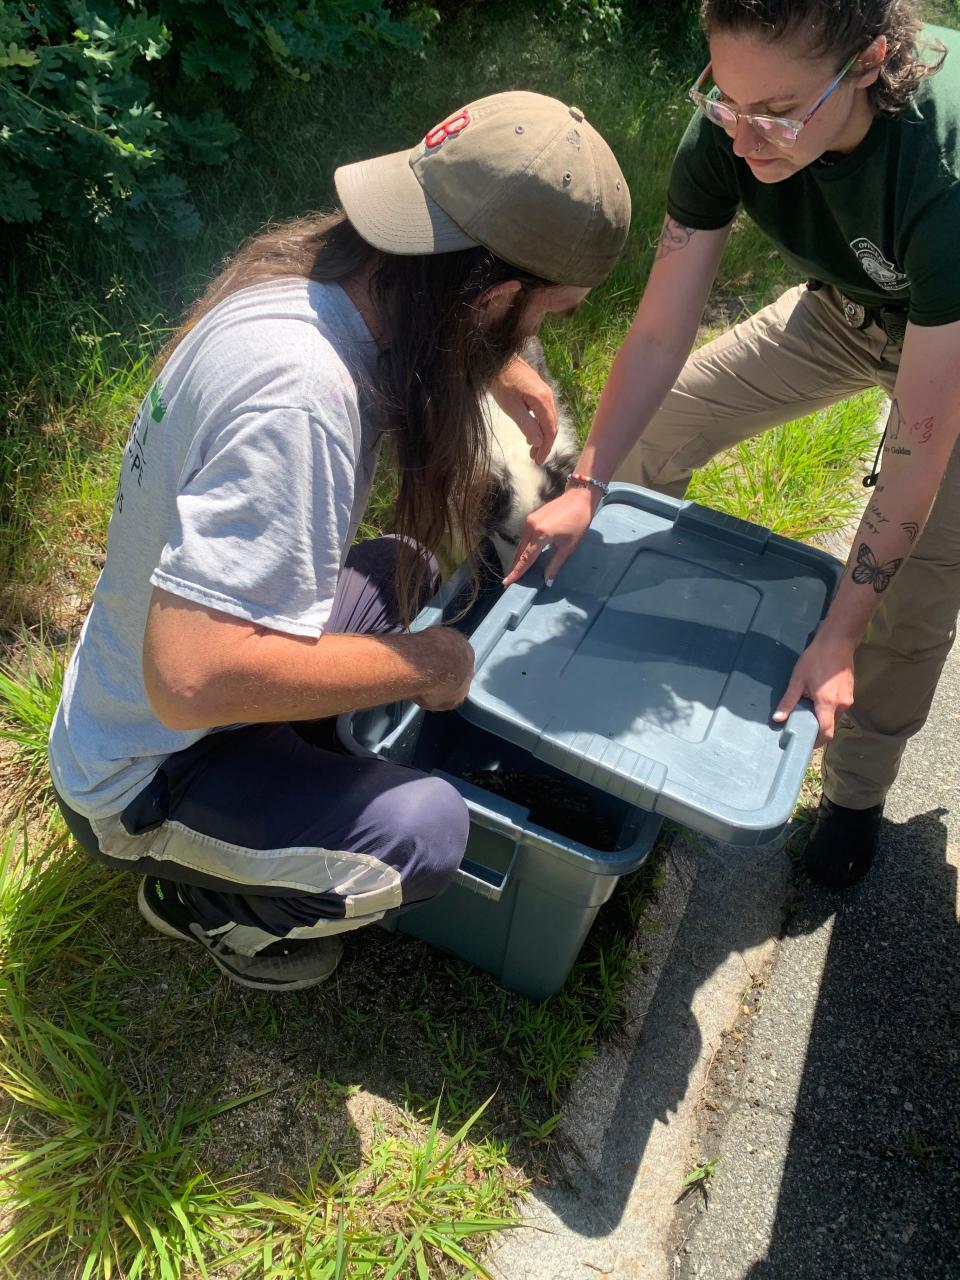 Kevin Friel, left, and Mattie Long, right, from The Osprey Project place the surviving chick from Monday's osprey nest fire on Thomas B. Landers Road in Falmouth into a box to be transported to the Cape Wildlife Center in Barnstable.